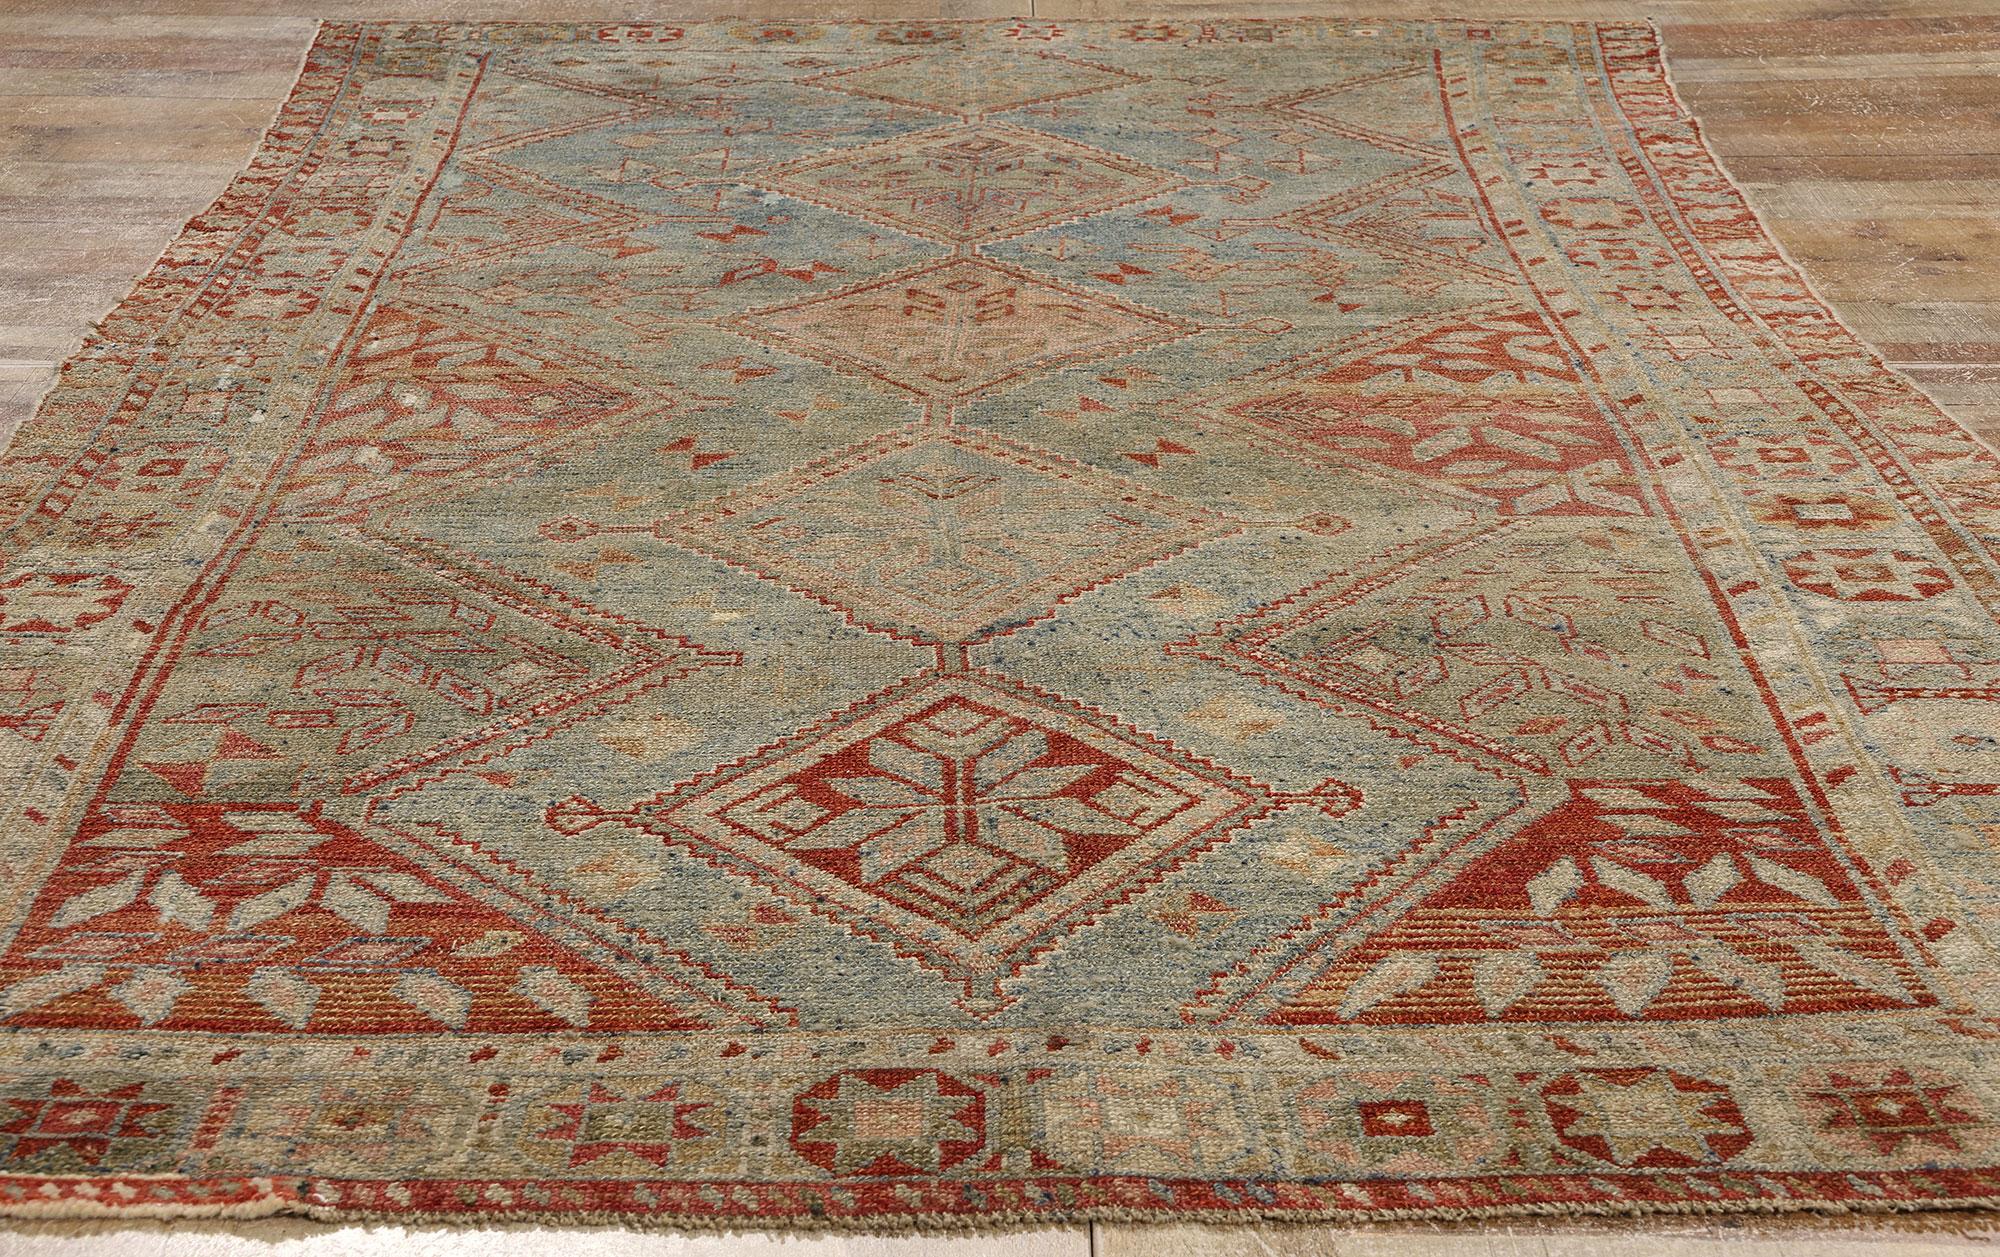 Wool Antique Persian Shiraz Rug, Rugged Beauty Meets Tribal Enchantment  For Sale